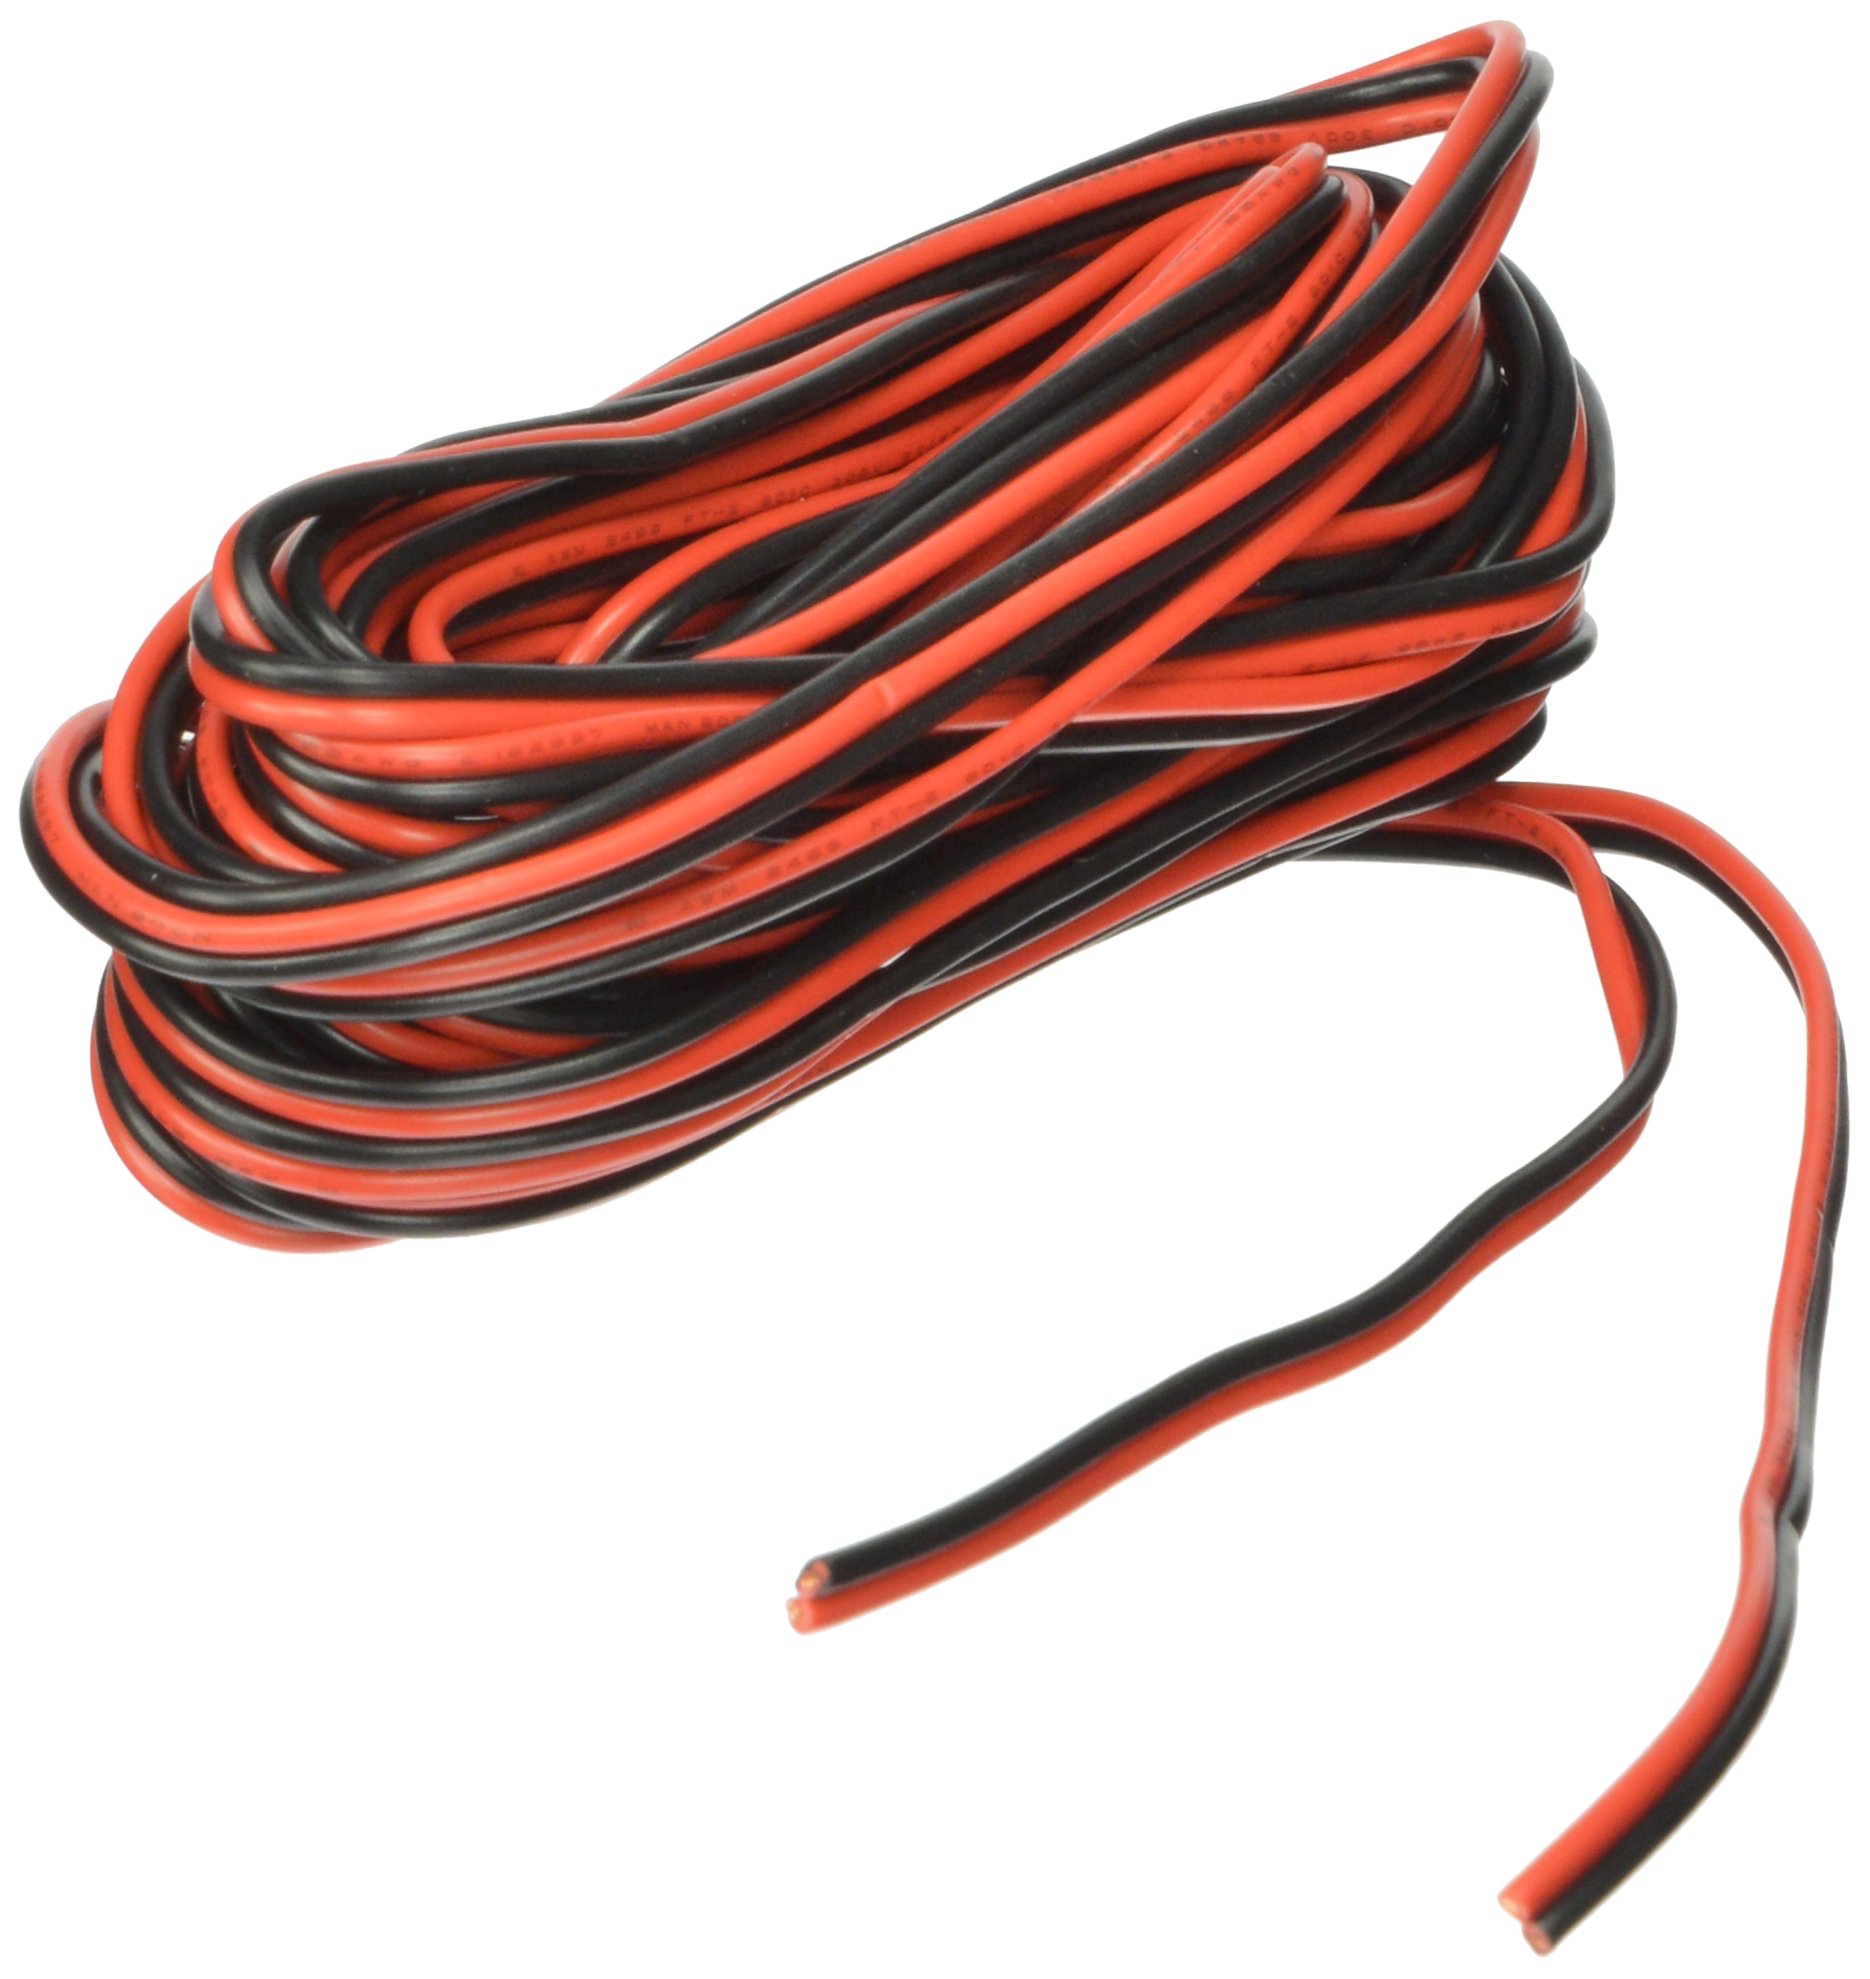 RoadPro RPCBH-25 25 Foot 22-Gauge Parallel Replacement Wire - Black/Red